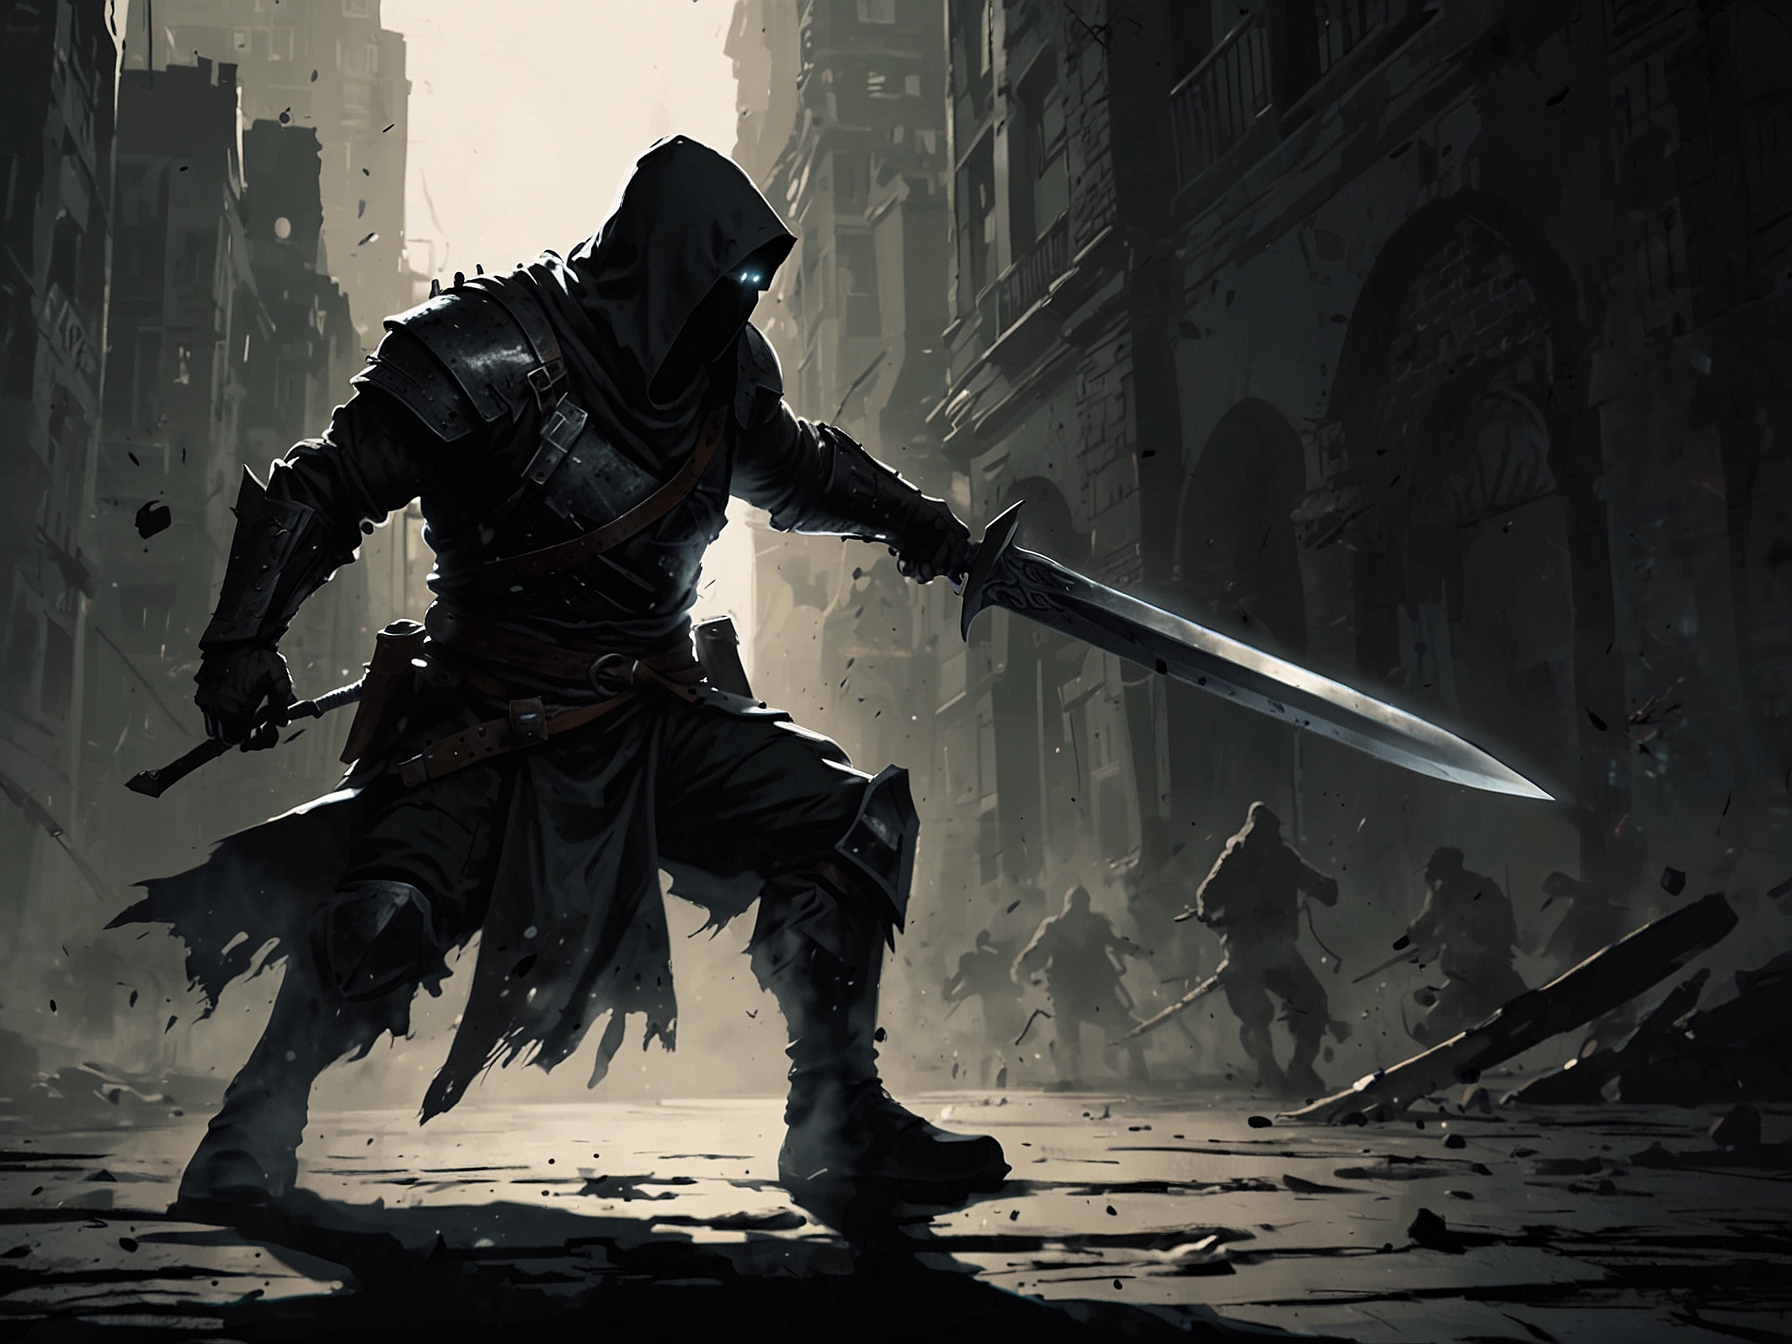 An intense, shadowy scene depicting The Silent Blade mid-action, showcasing their unmatched agility and stealth as they carry out a deadly strike with precision.